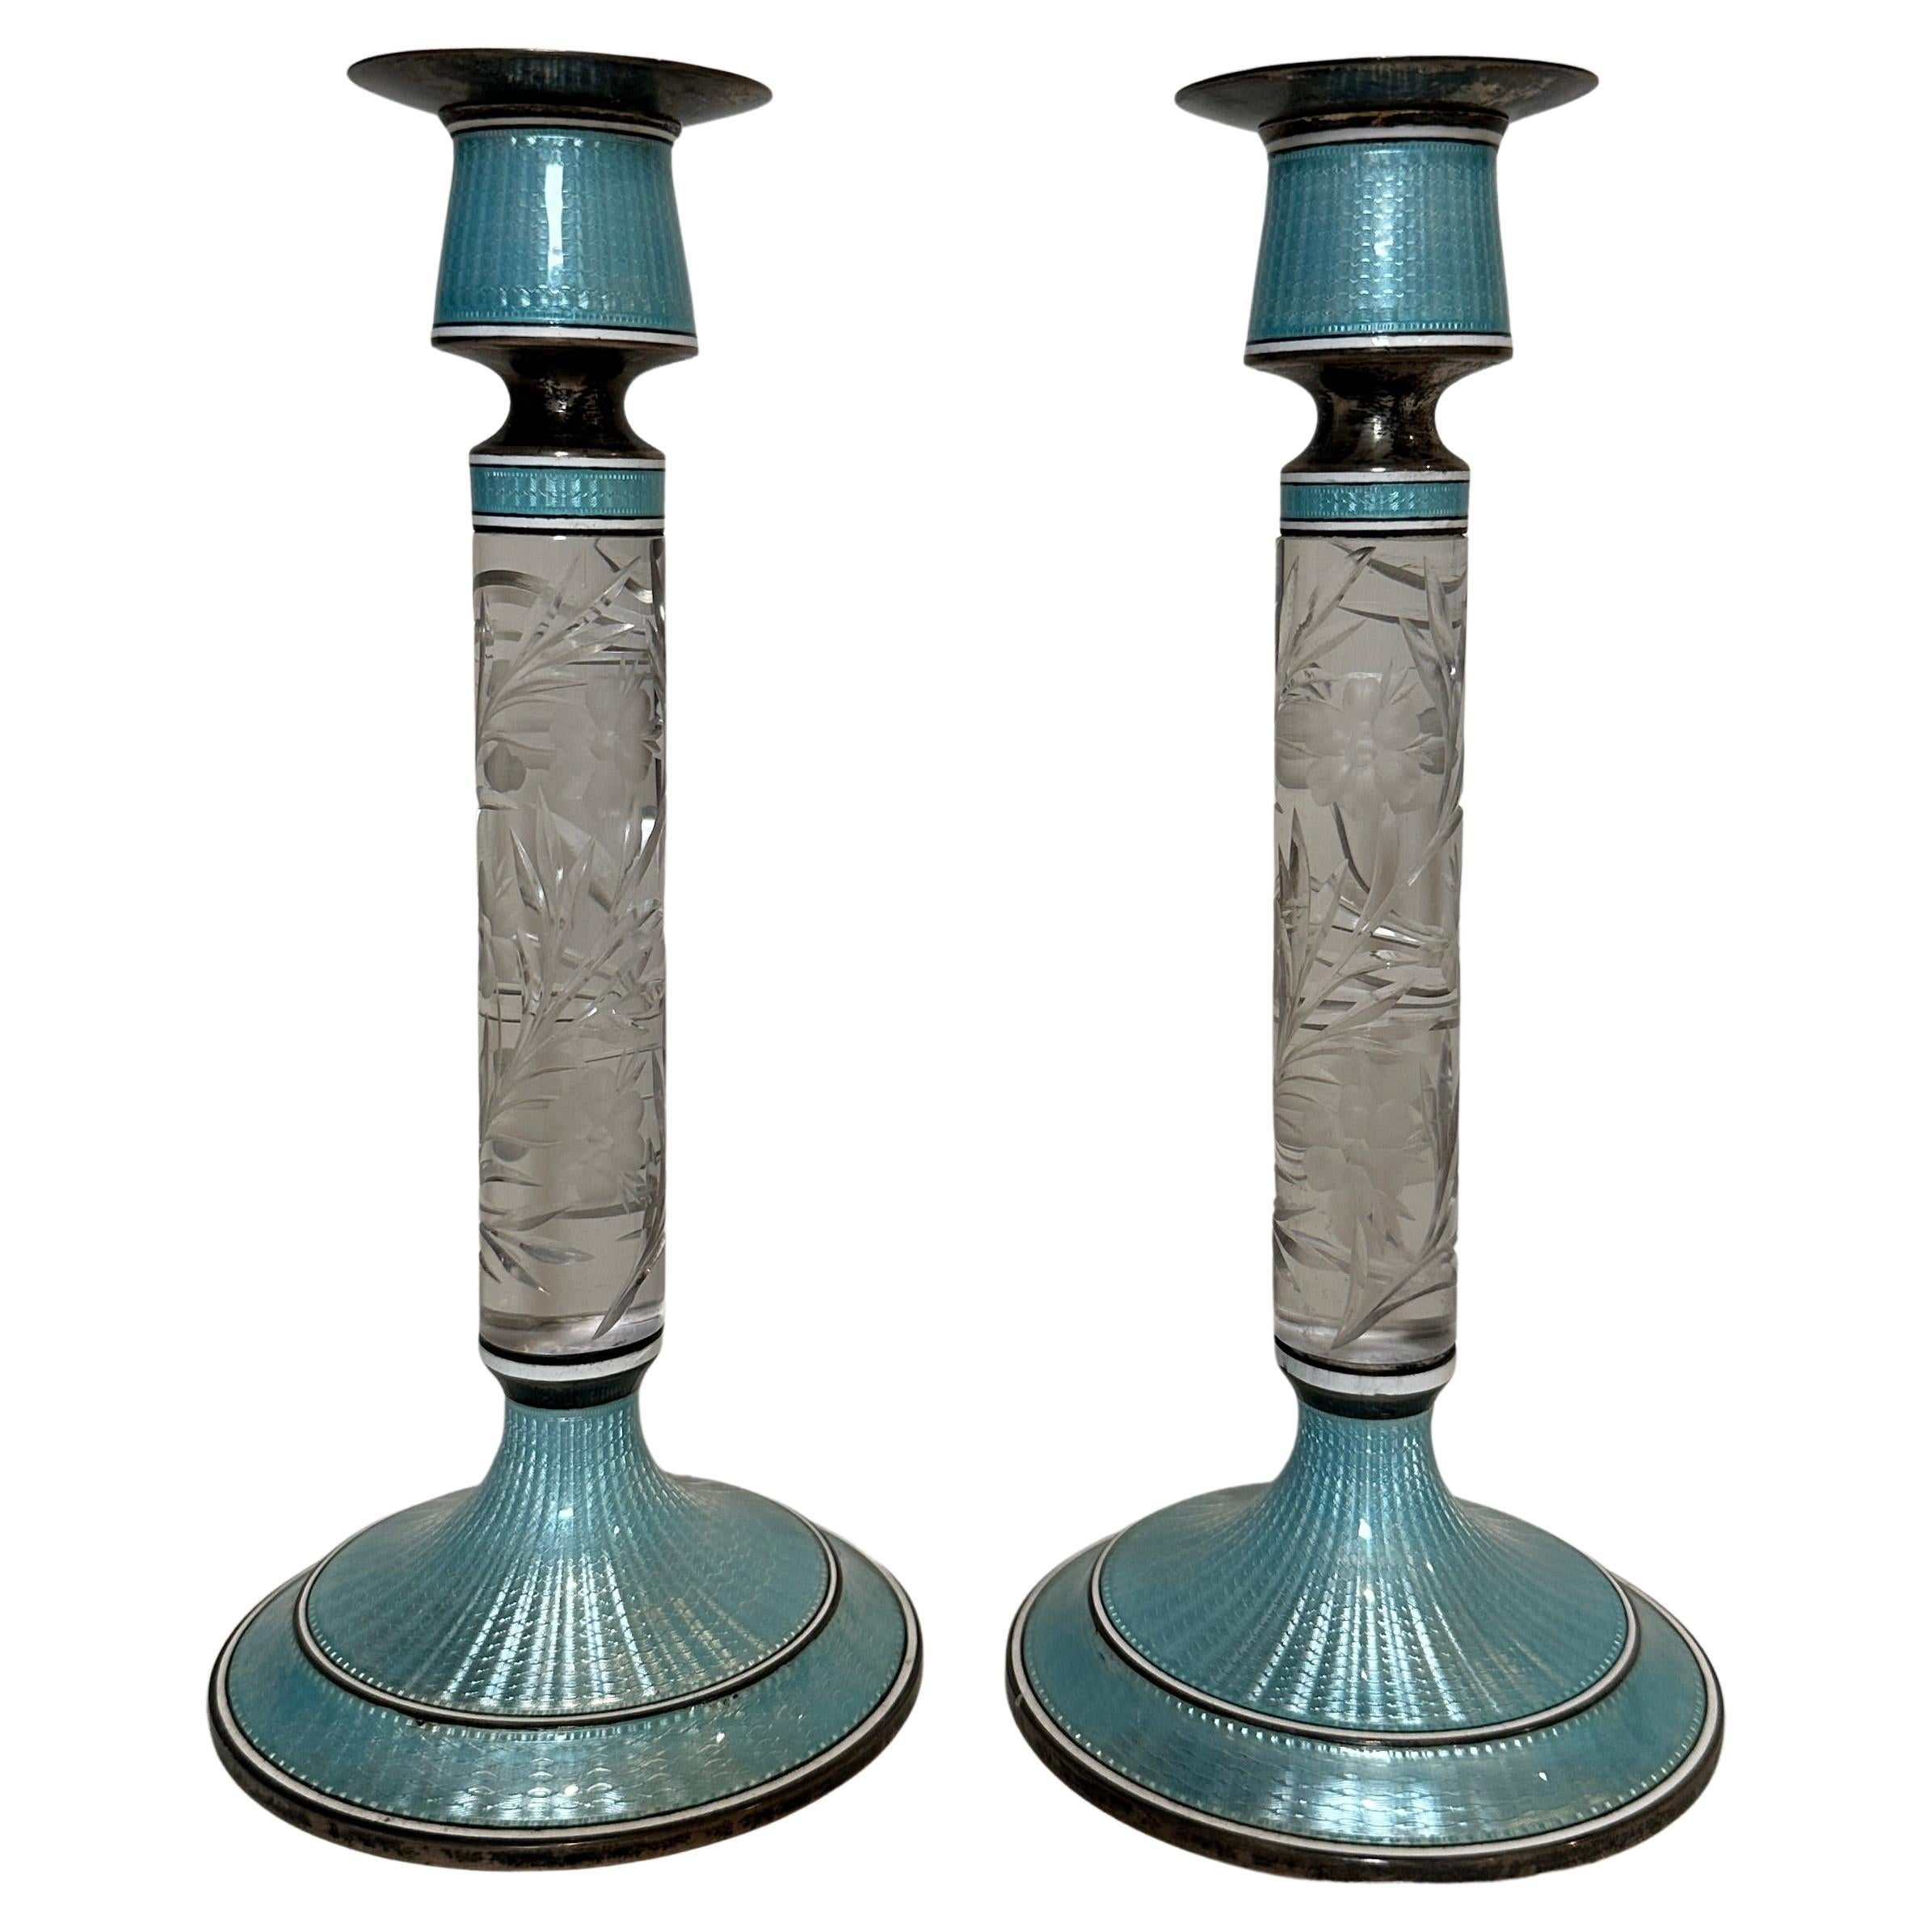 Pair of Guilloche Enamel and Cut Glass Sterling Silver Candlesticks